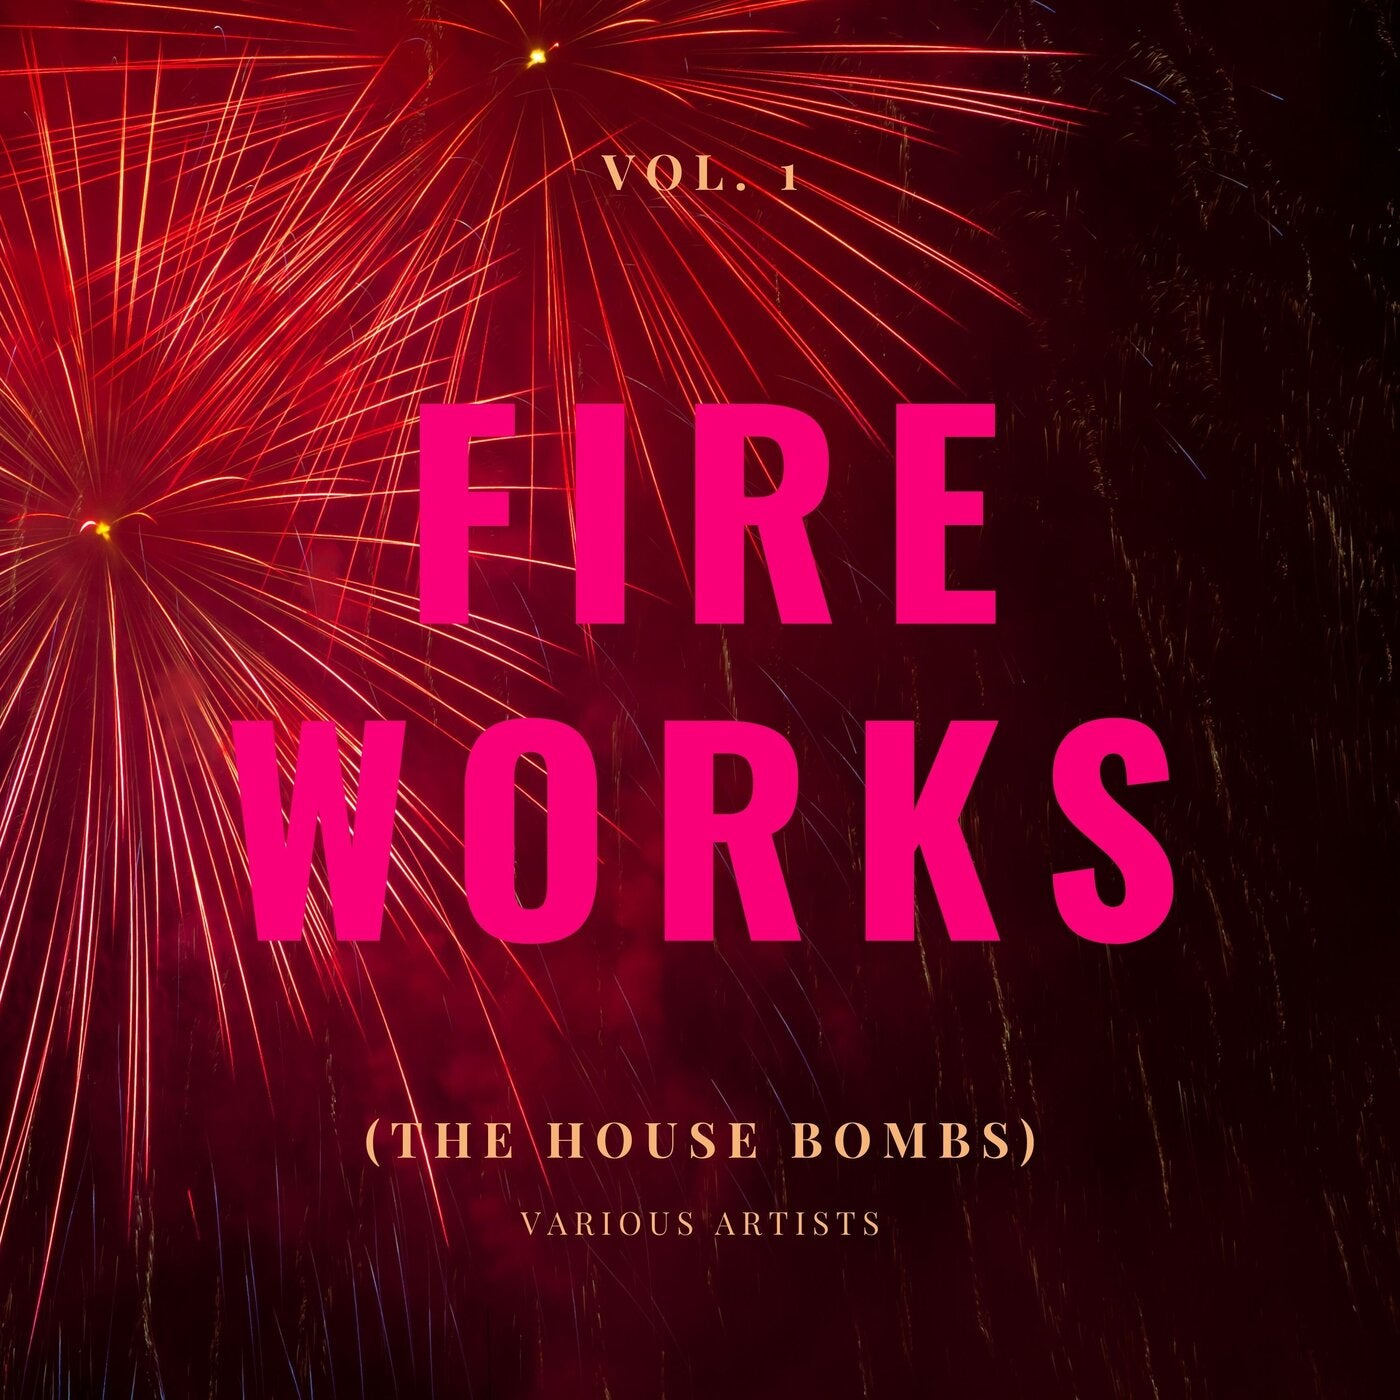 Fireworks (The House Bombs), Vol. 1